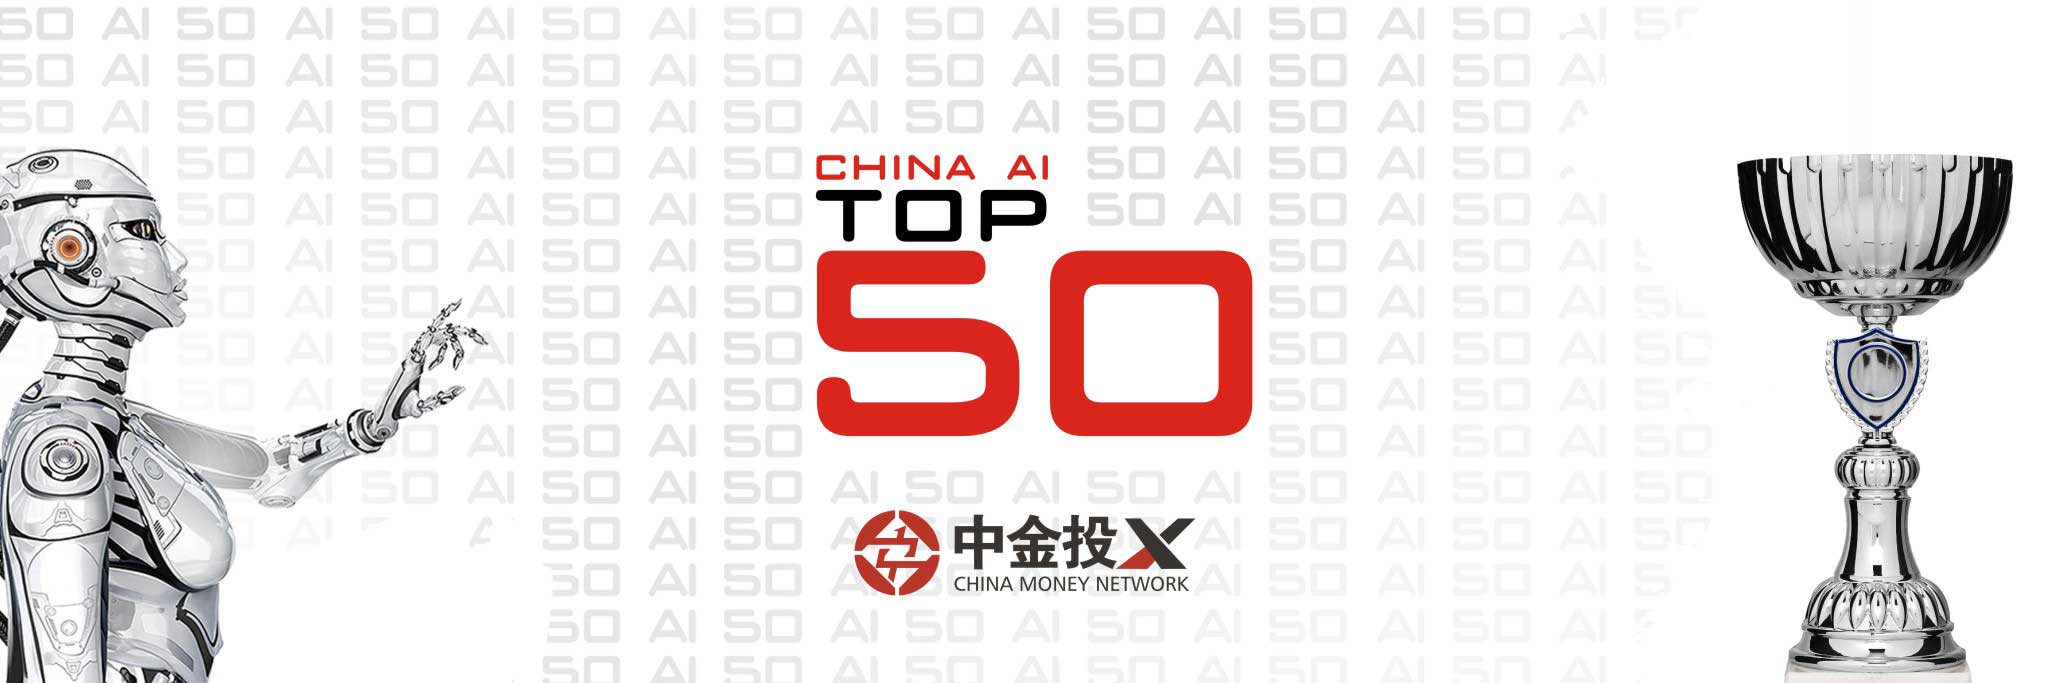 China AI Top 50 - 2018: Ranking of Artificial Intelligence Companies